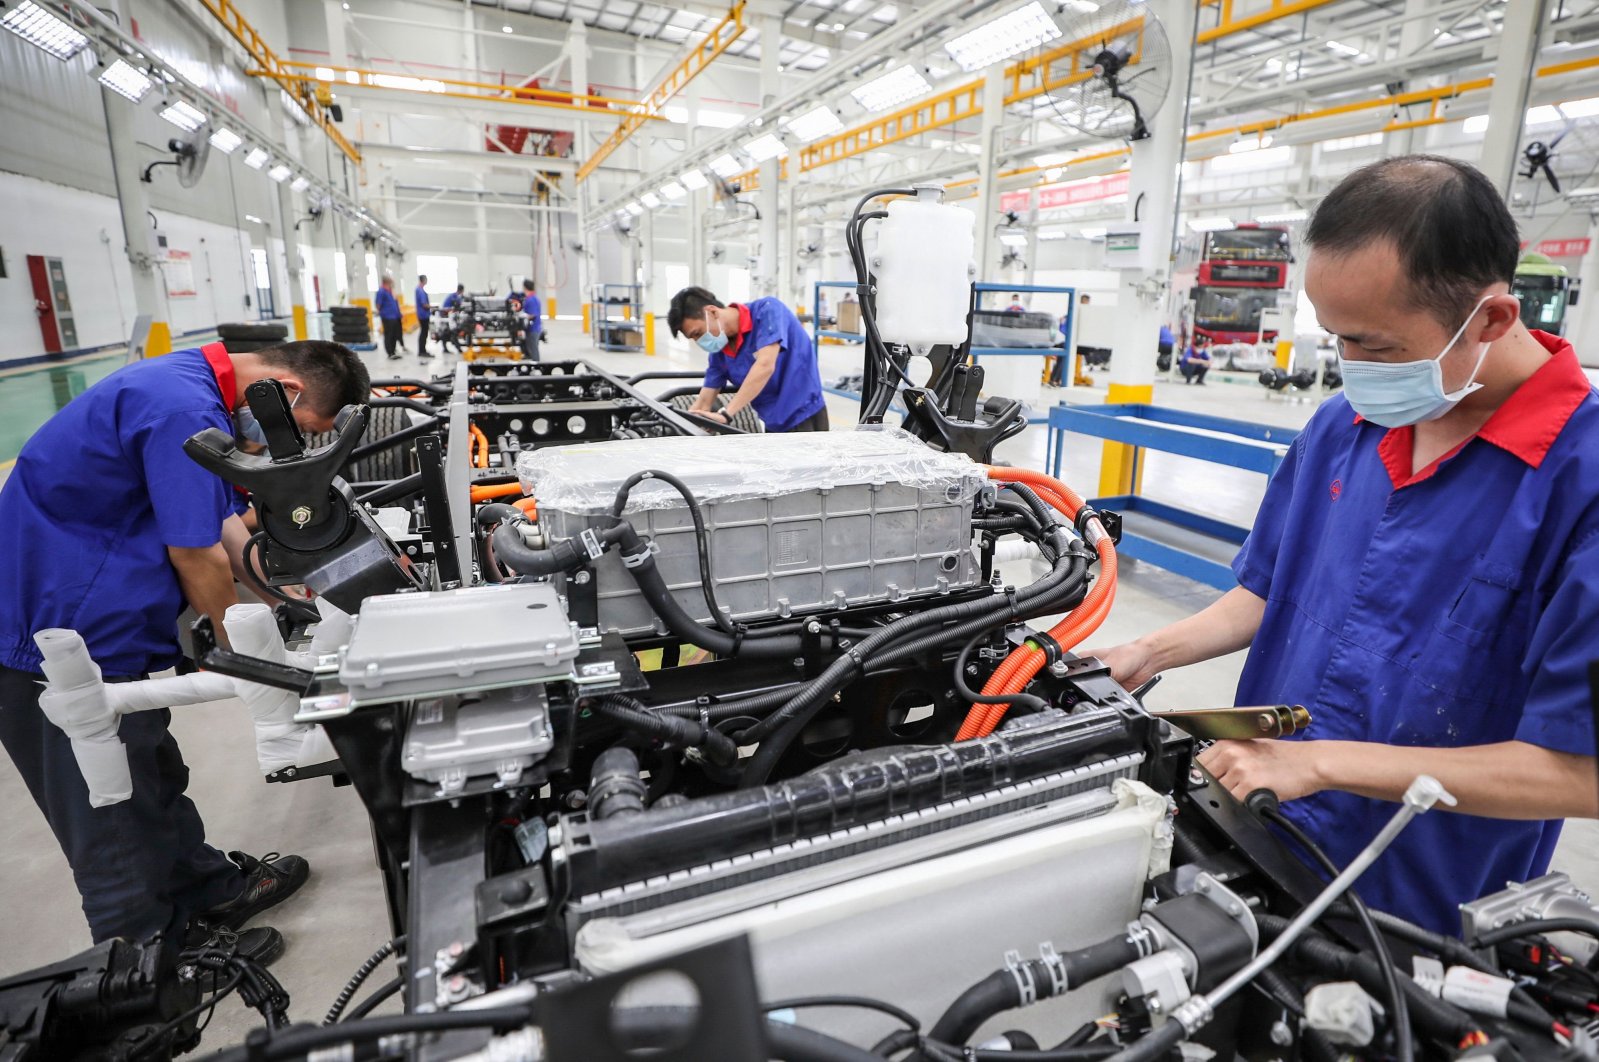 Employees working on a new energy vehicle (NEV) assembly line at a BYD Auto factory in Huaian in China's eastern Jiangsu province, July 6, 2020. (AFP Photo)